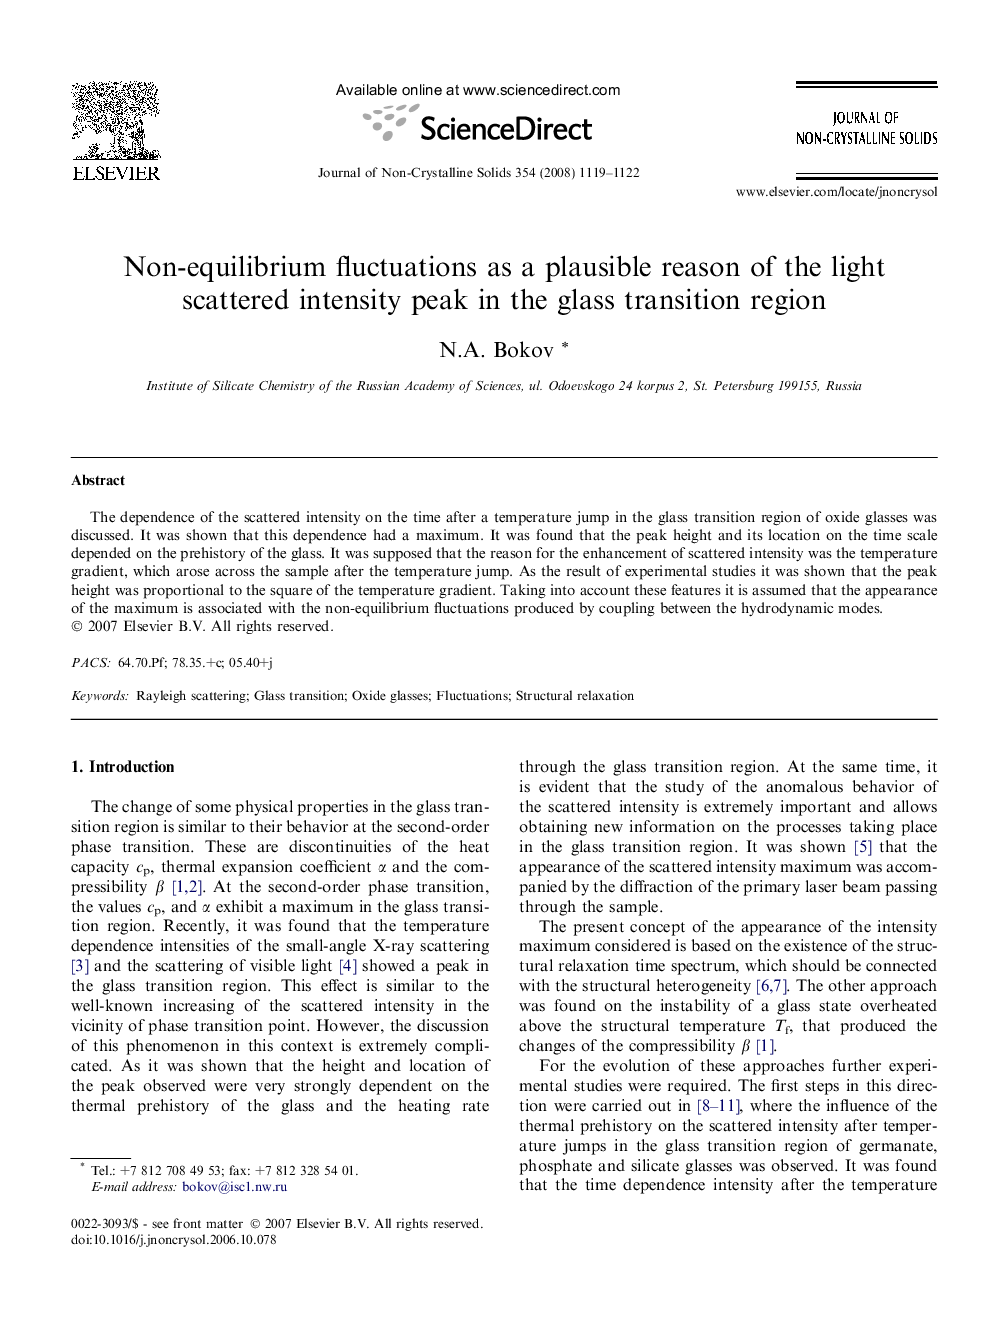 Non-equilibrium fluctuations as a plausible reason of the light scattered intensity peak in the glass transition region